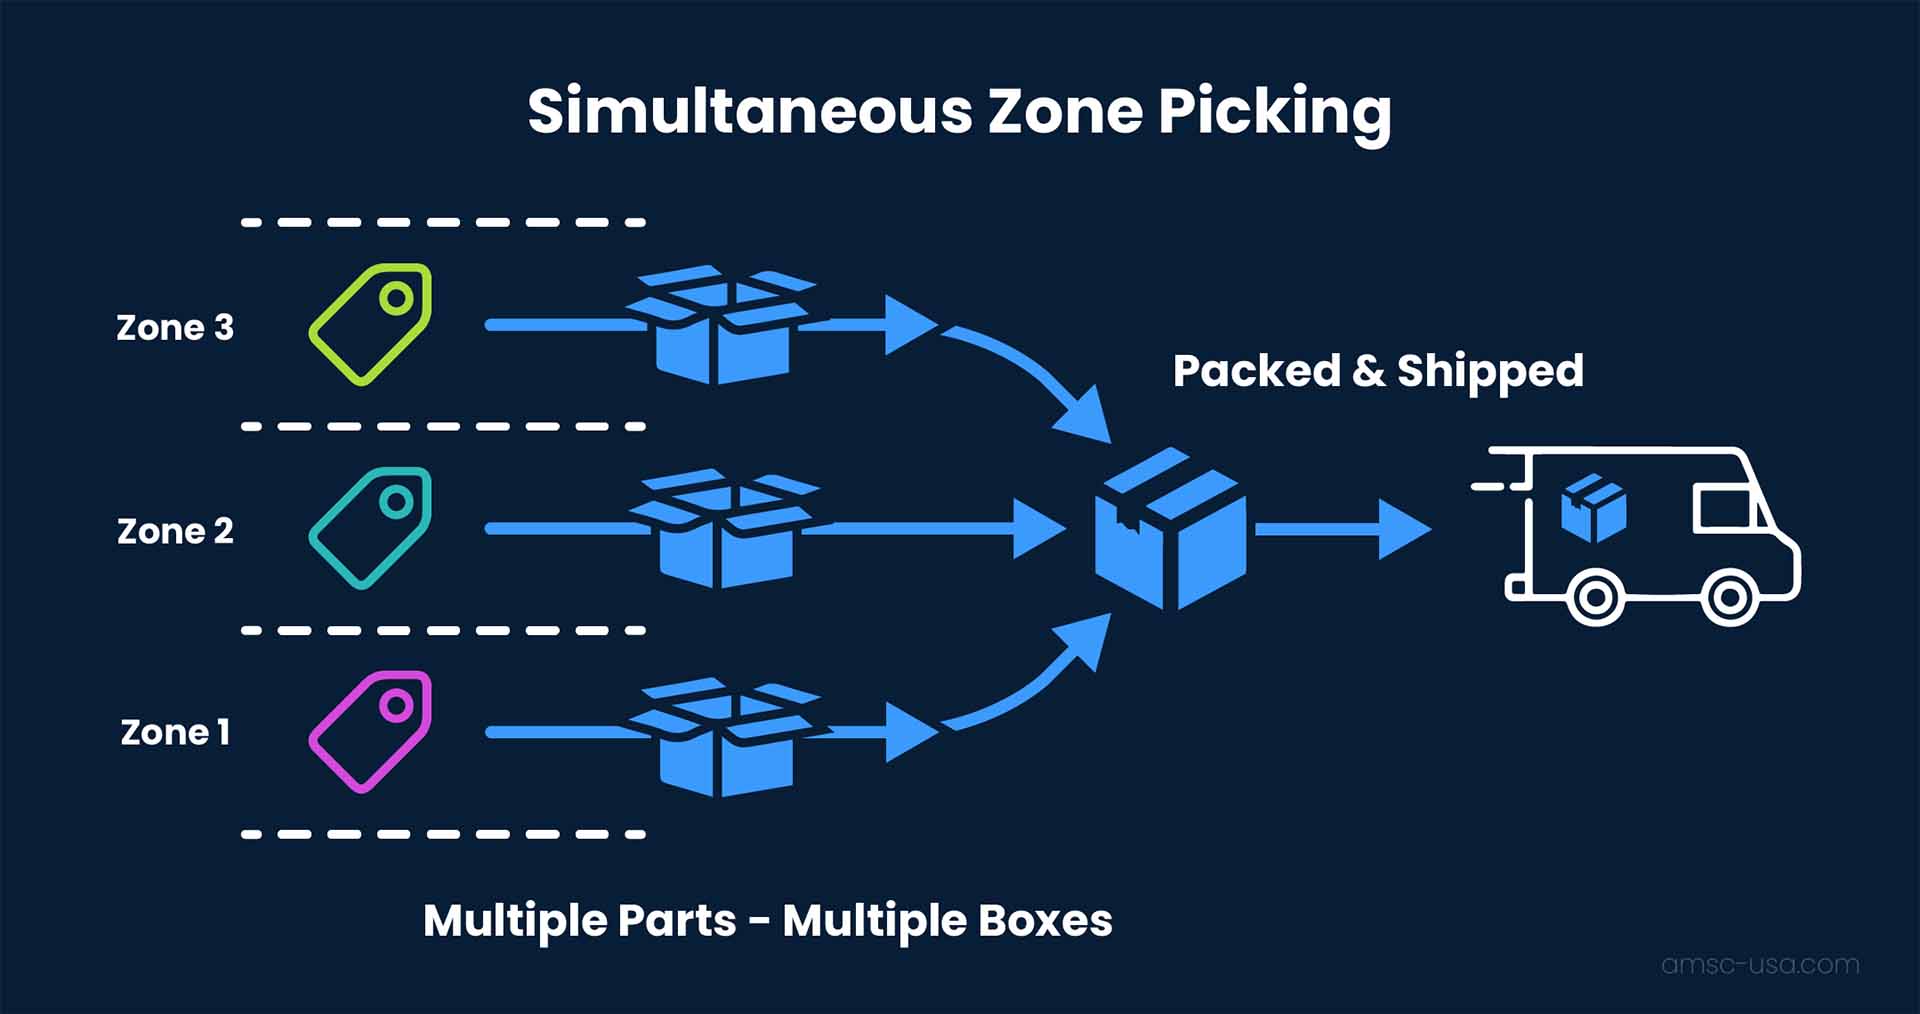 A graphic showing the workflow of simultaneous zone picking